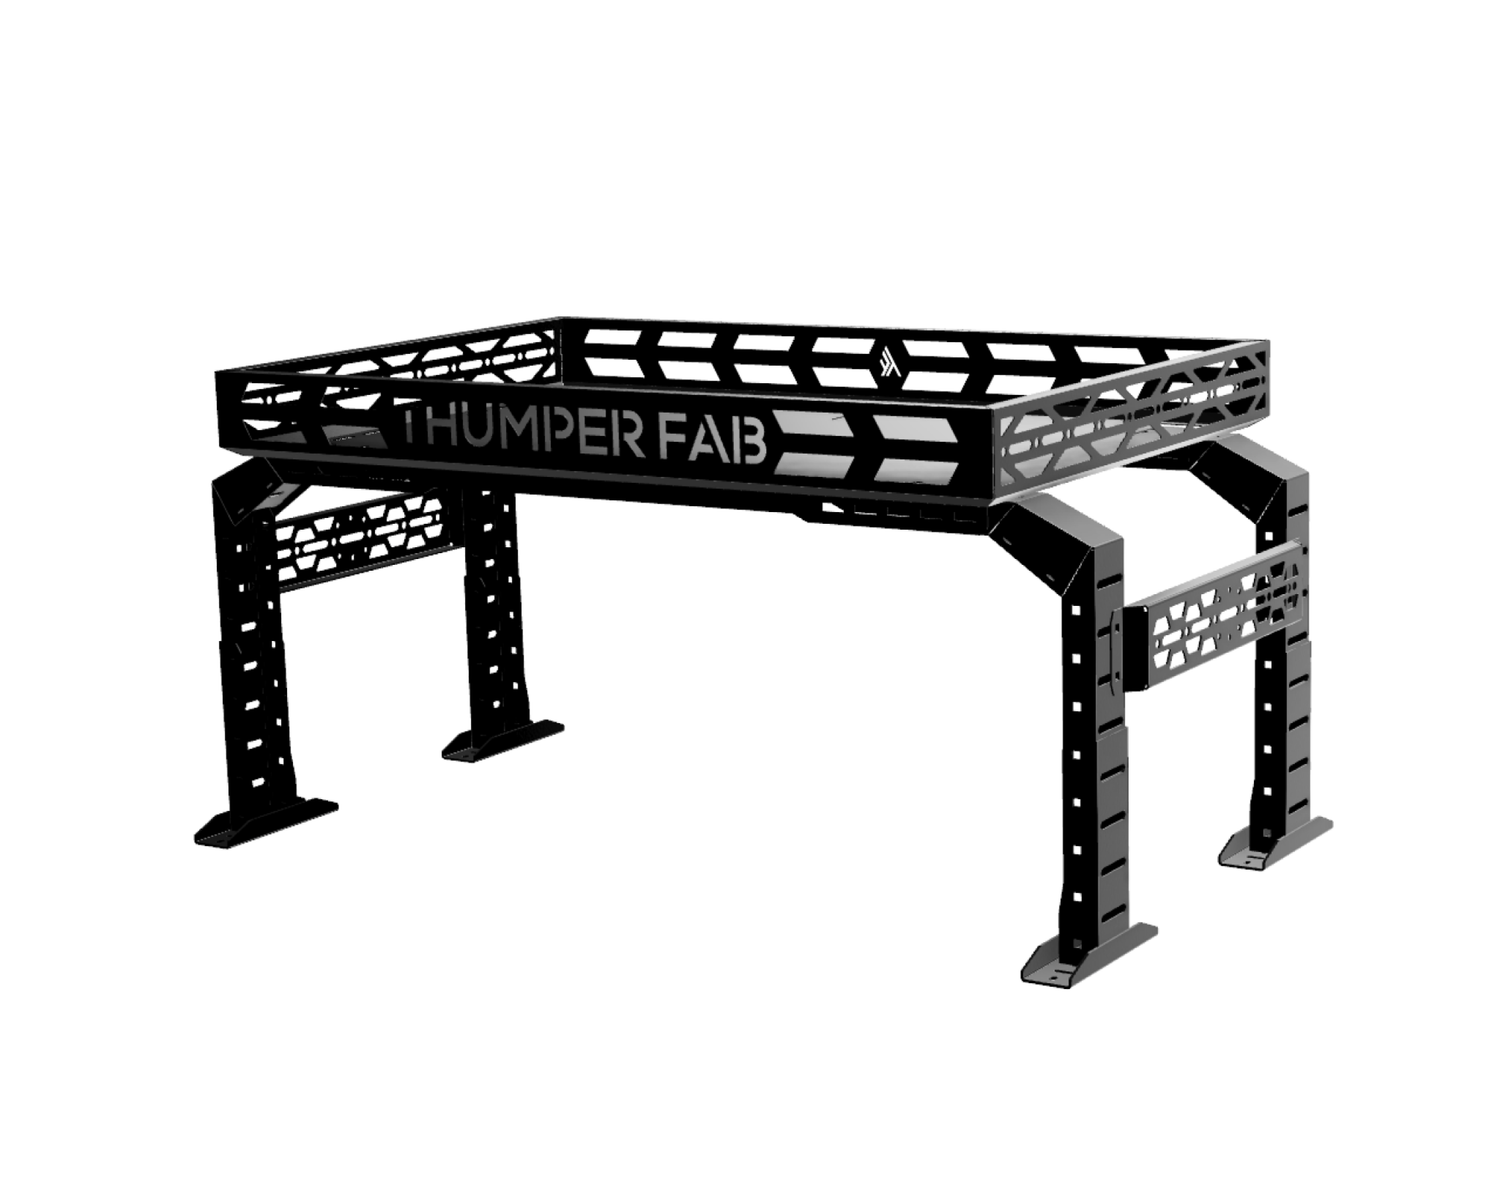 Thumper Fab's Durable UTV Racks | Official Site | Enhance Your Outdoor Experience